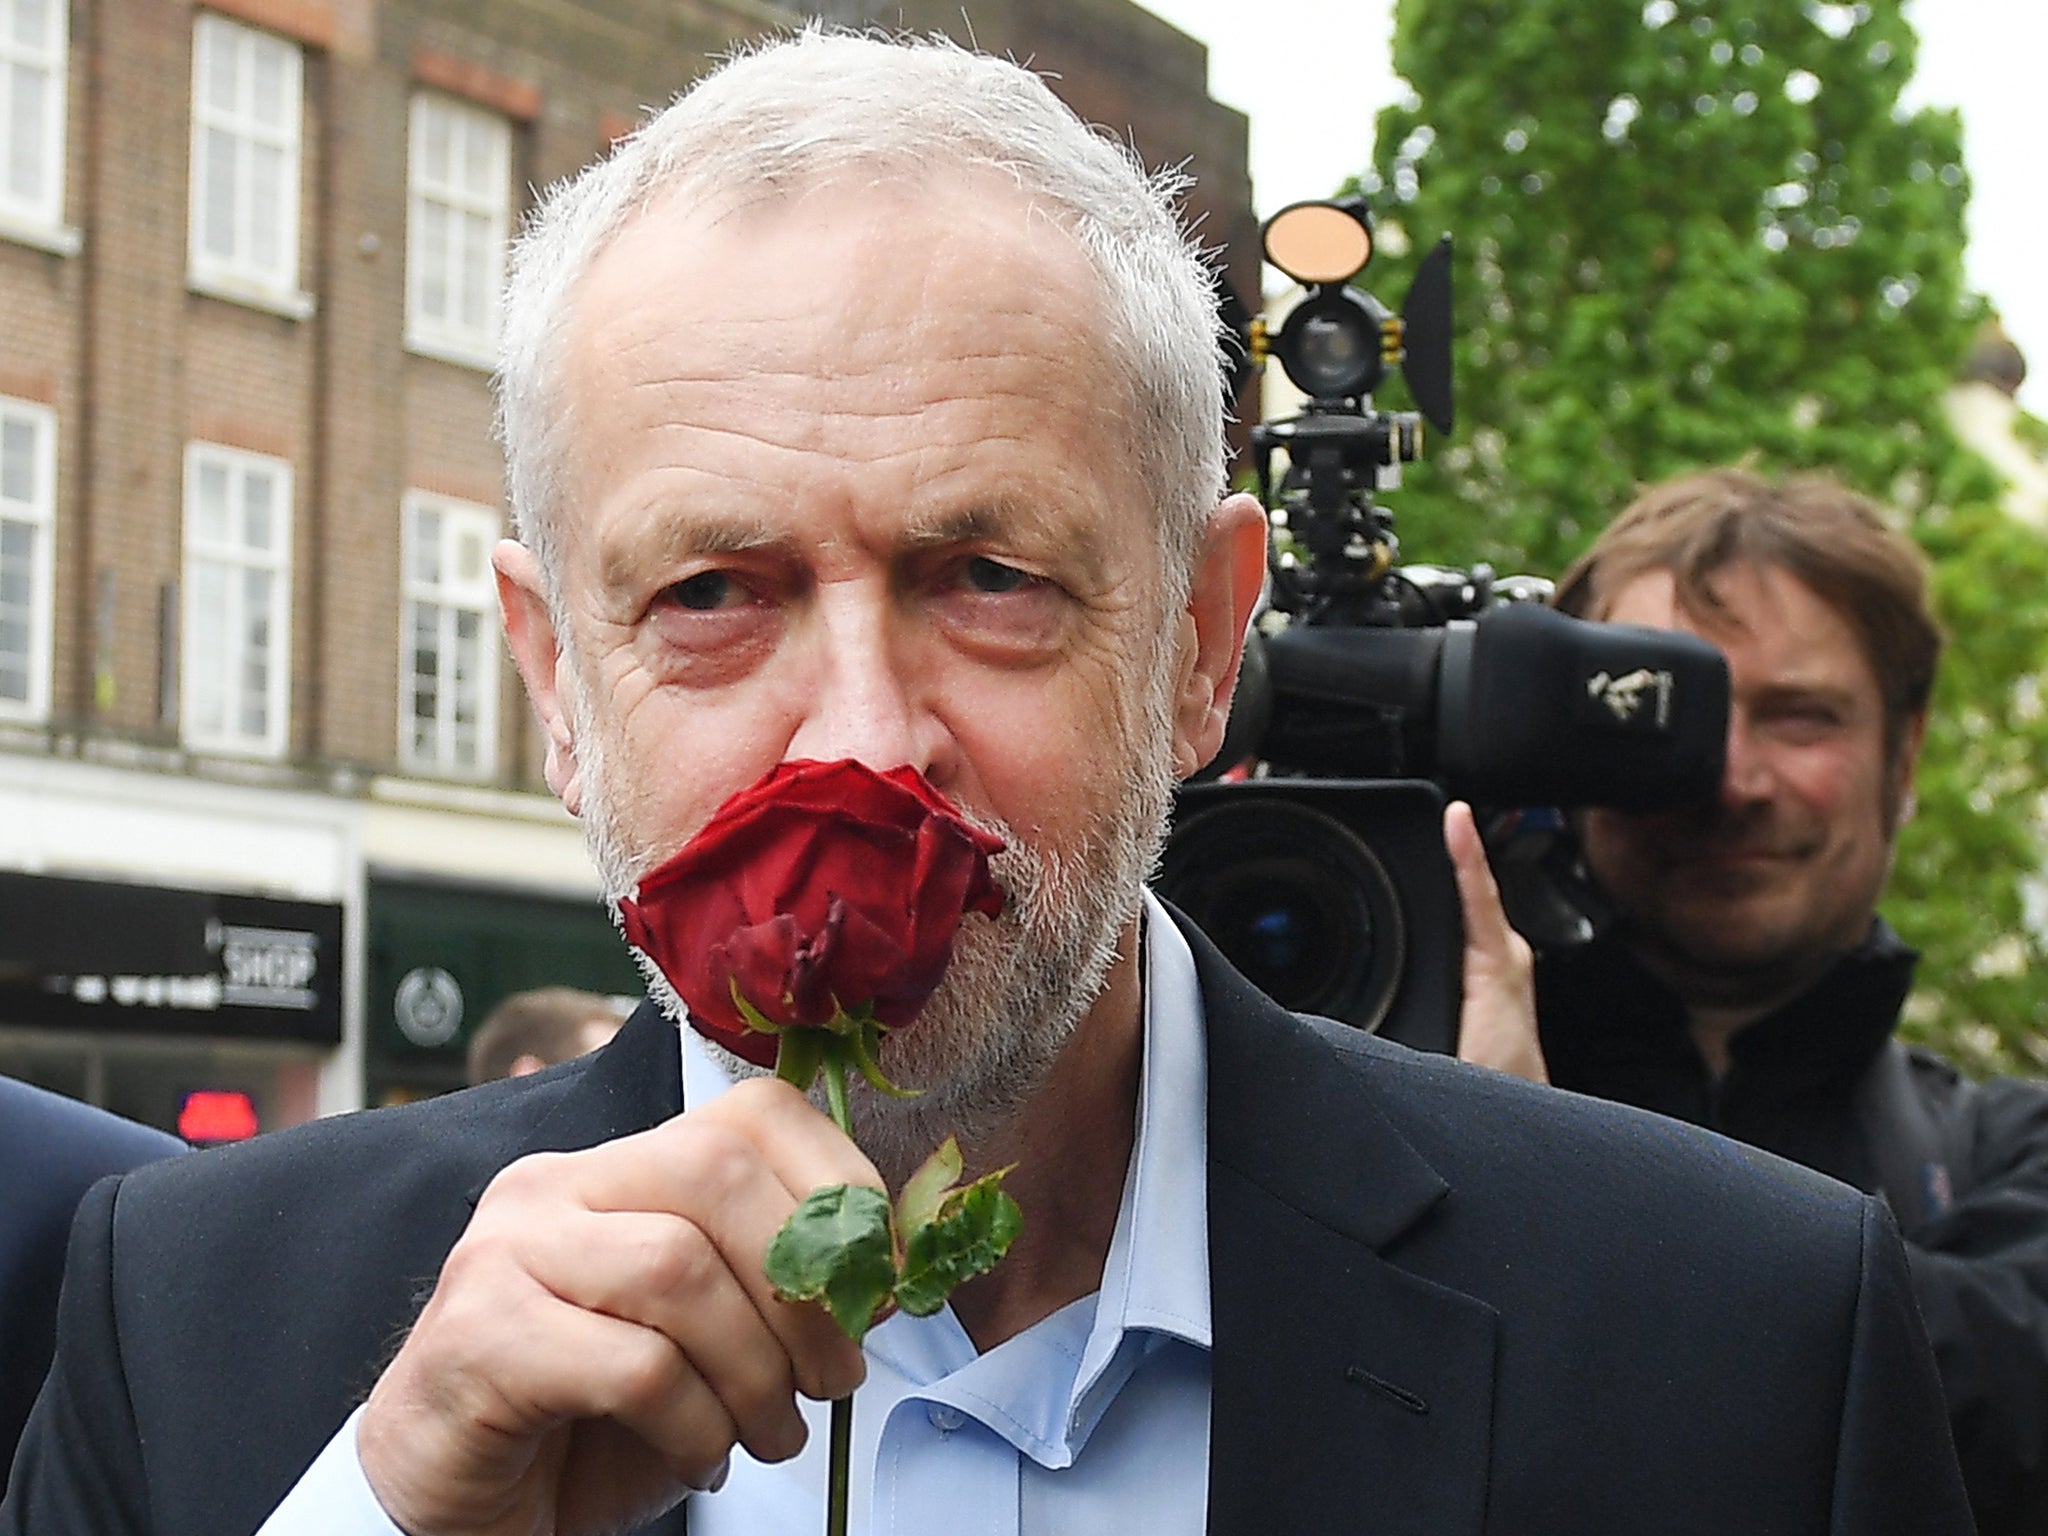 British Labour leader Jeremy Corbyn smells a red rose alongside Mohammed Yasin, the Labour Party general election candidate for Bedford and Kempston while on the campaign trail in Bedford